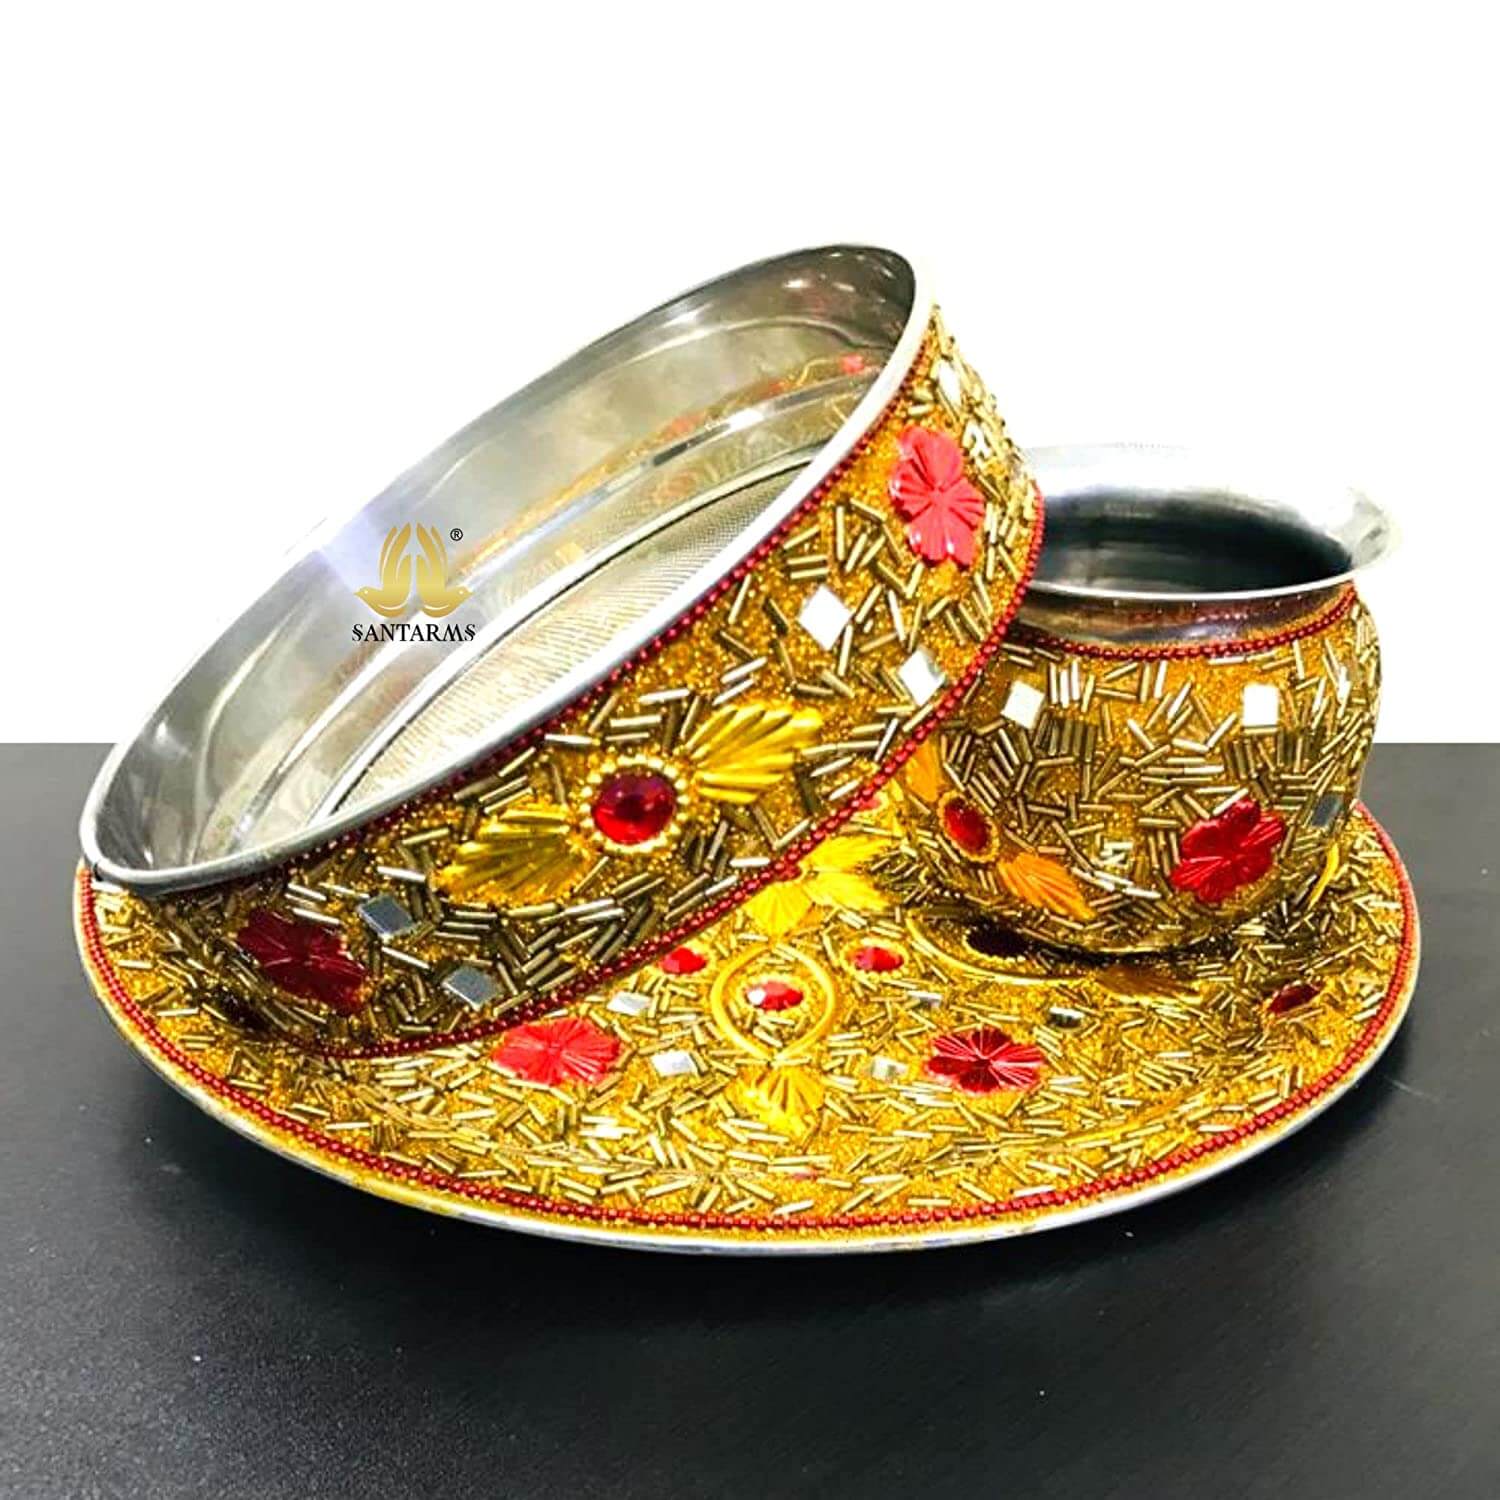 Best Karwa Chauth Gift Ideas 2021 to Make your Day Blissful